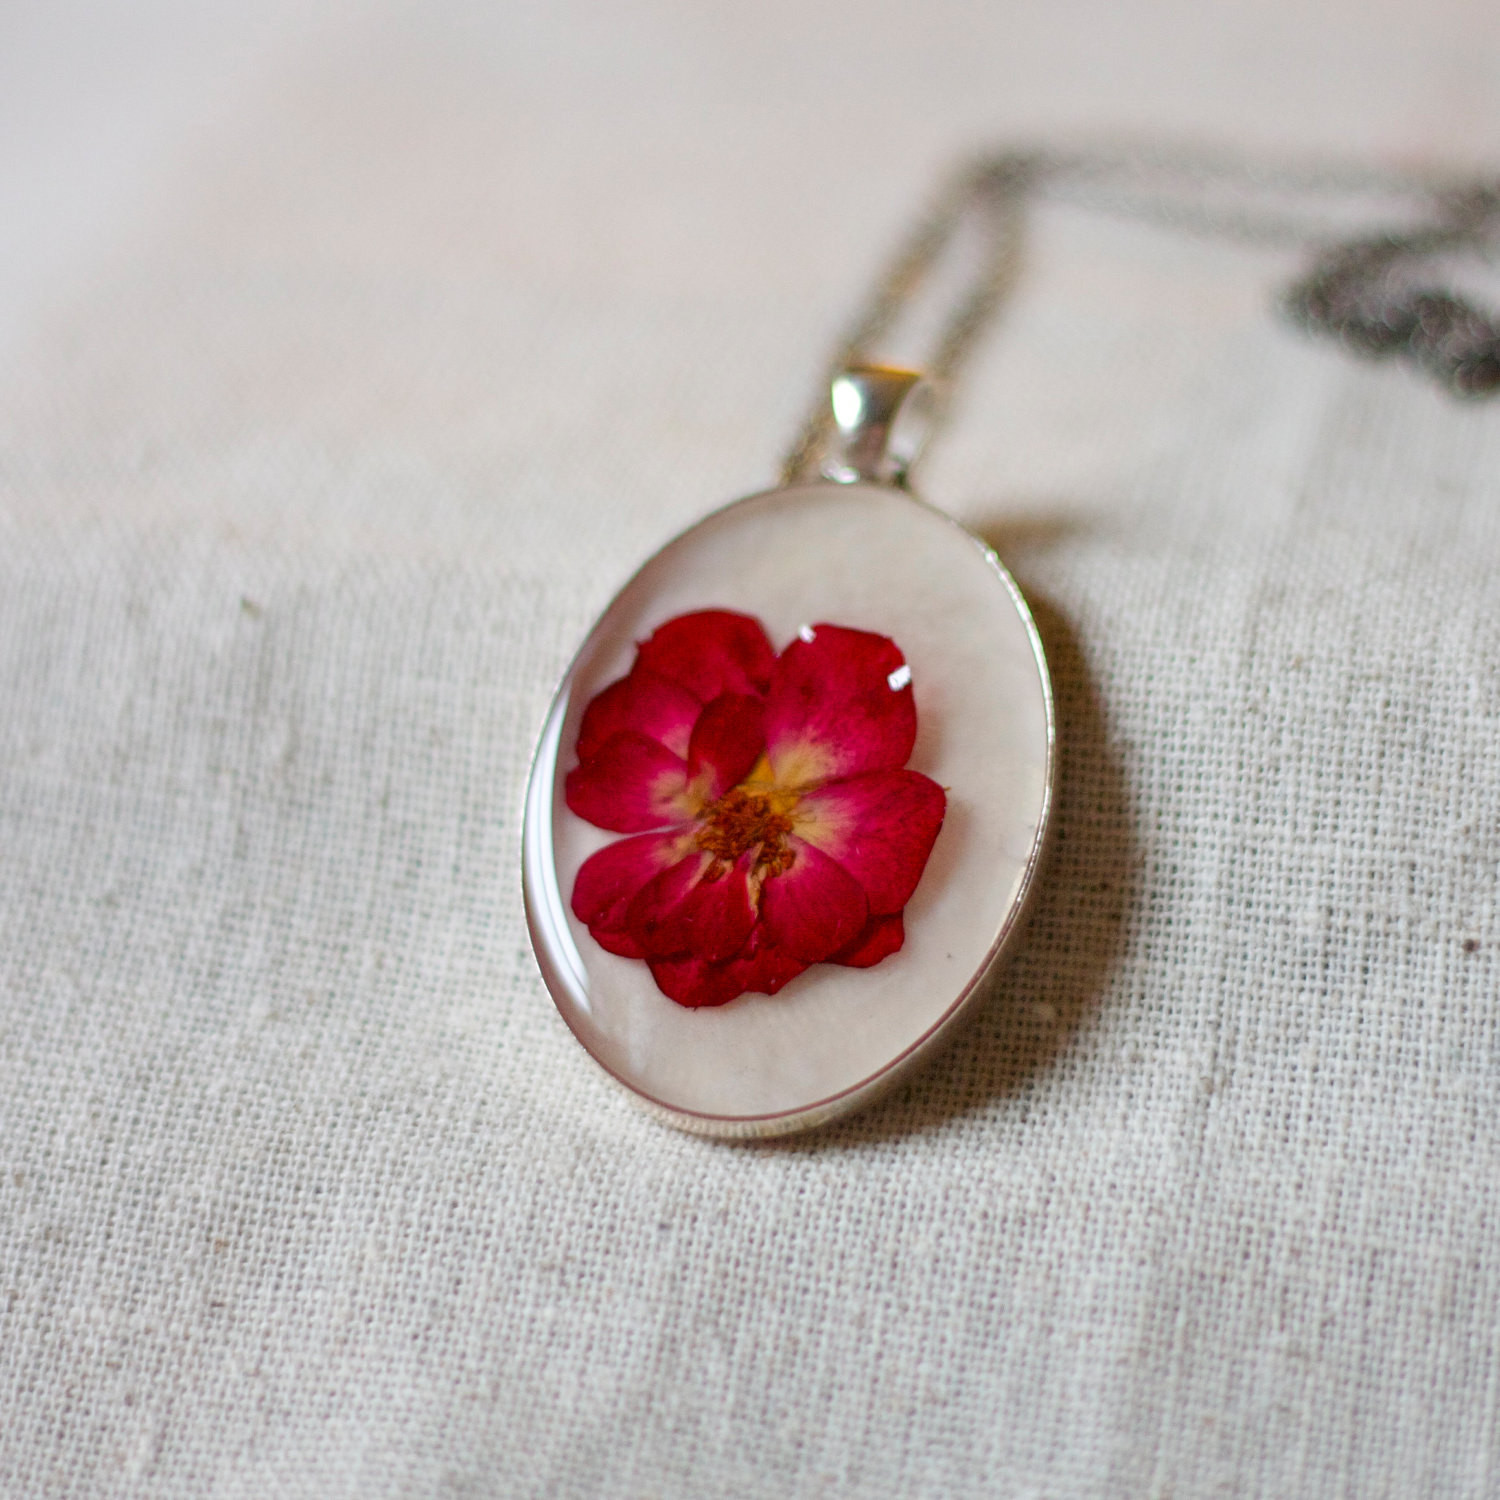 Pressed Flower Necklace
 pressed flower necklace red rose petals winter by